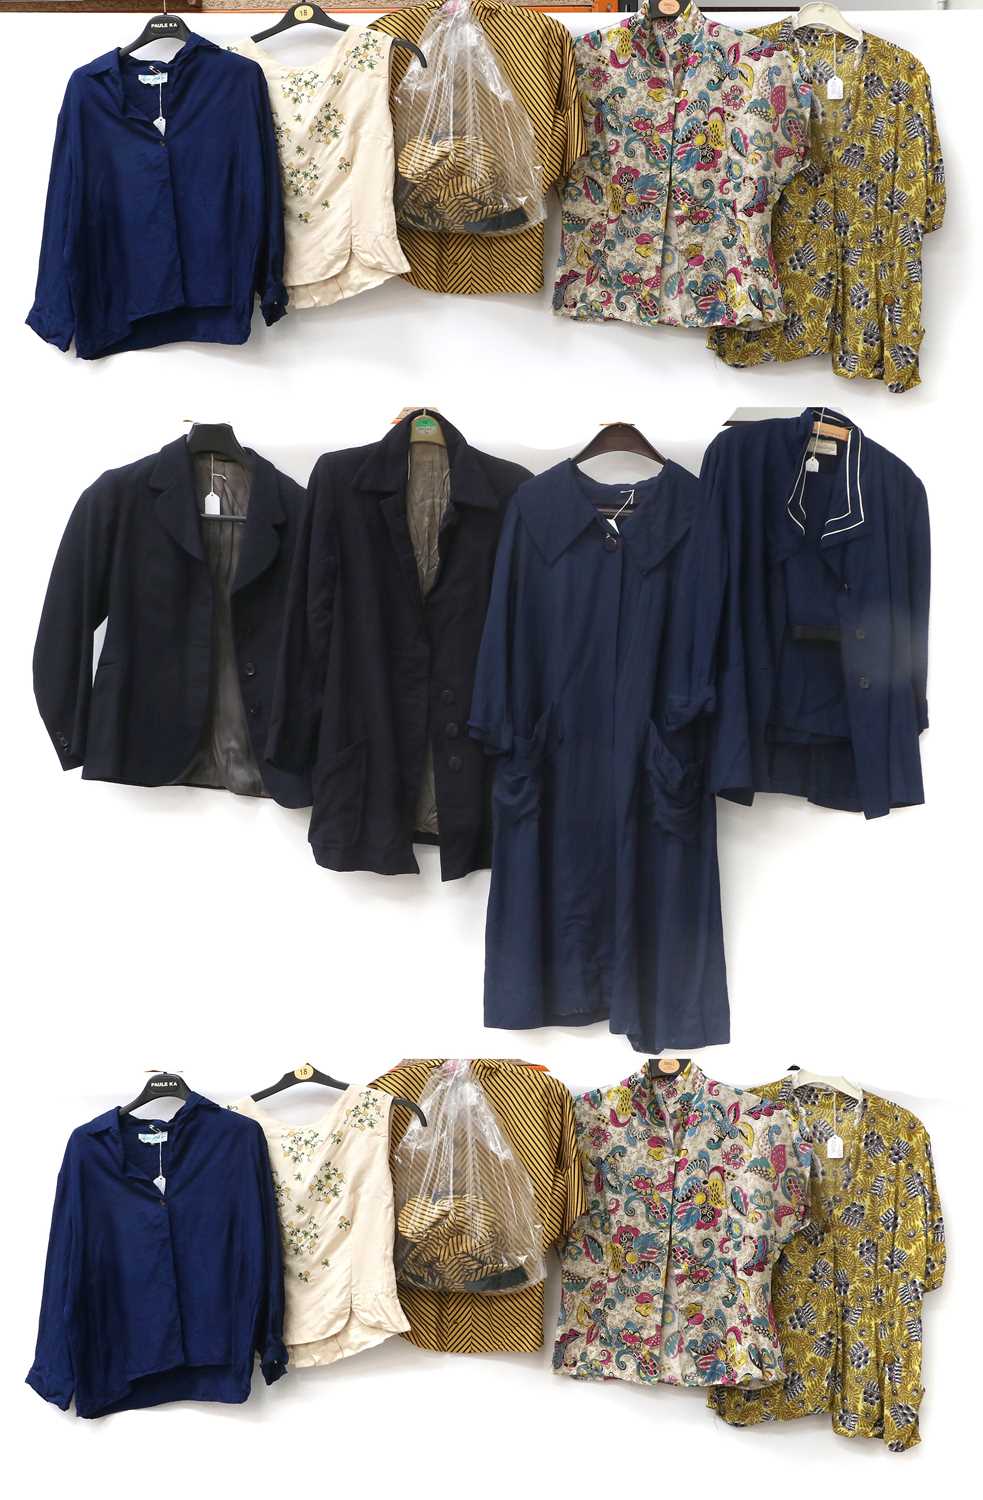 Circa 1930-50s Ladies Day Wear and Separates, comprising eight short and long sleeve tops in printed